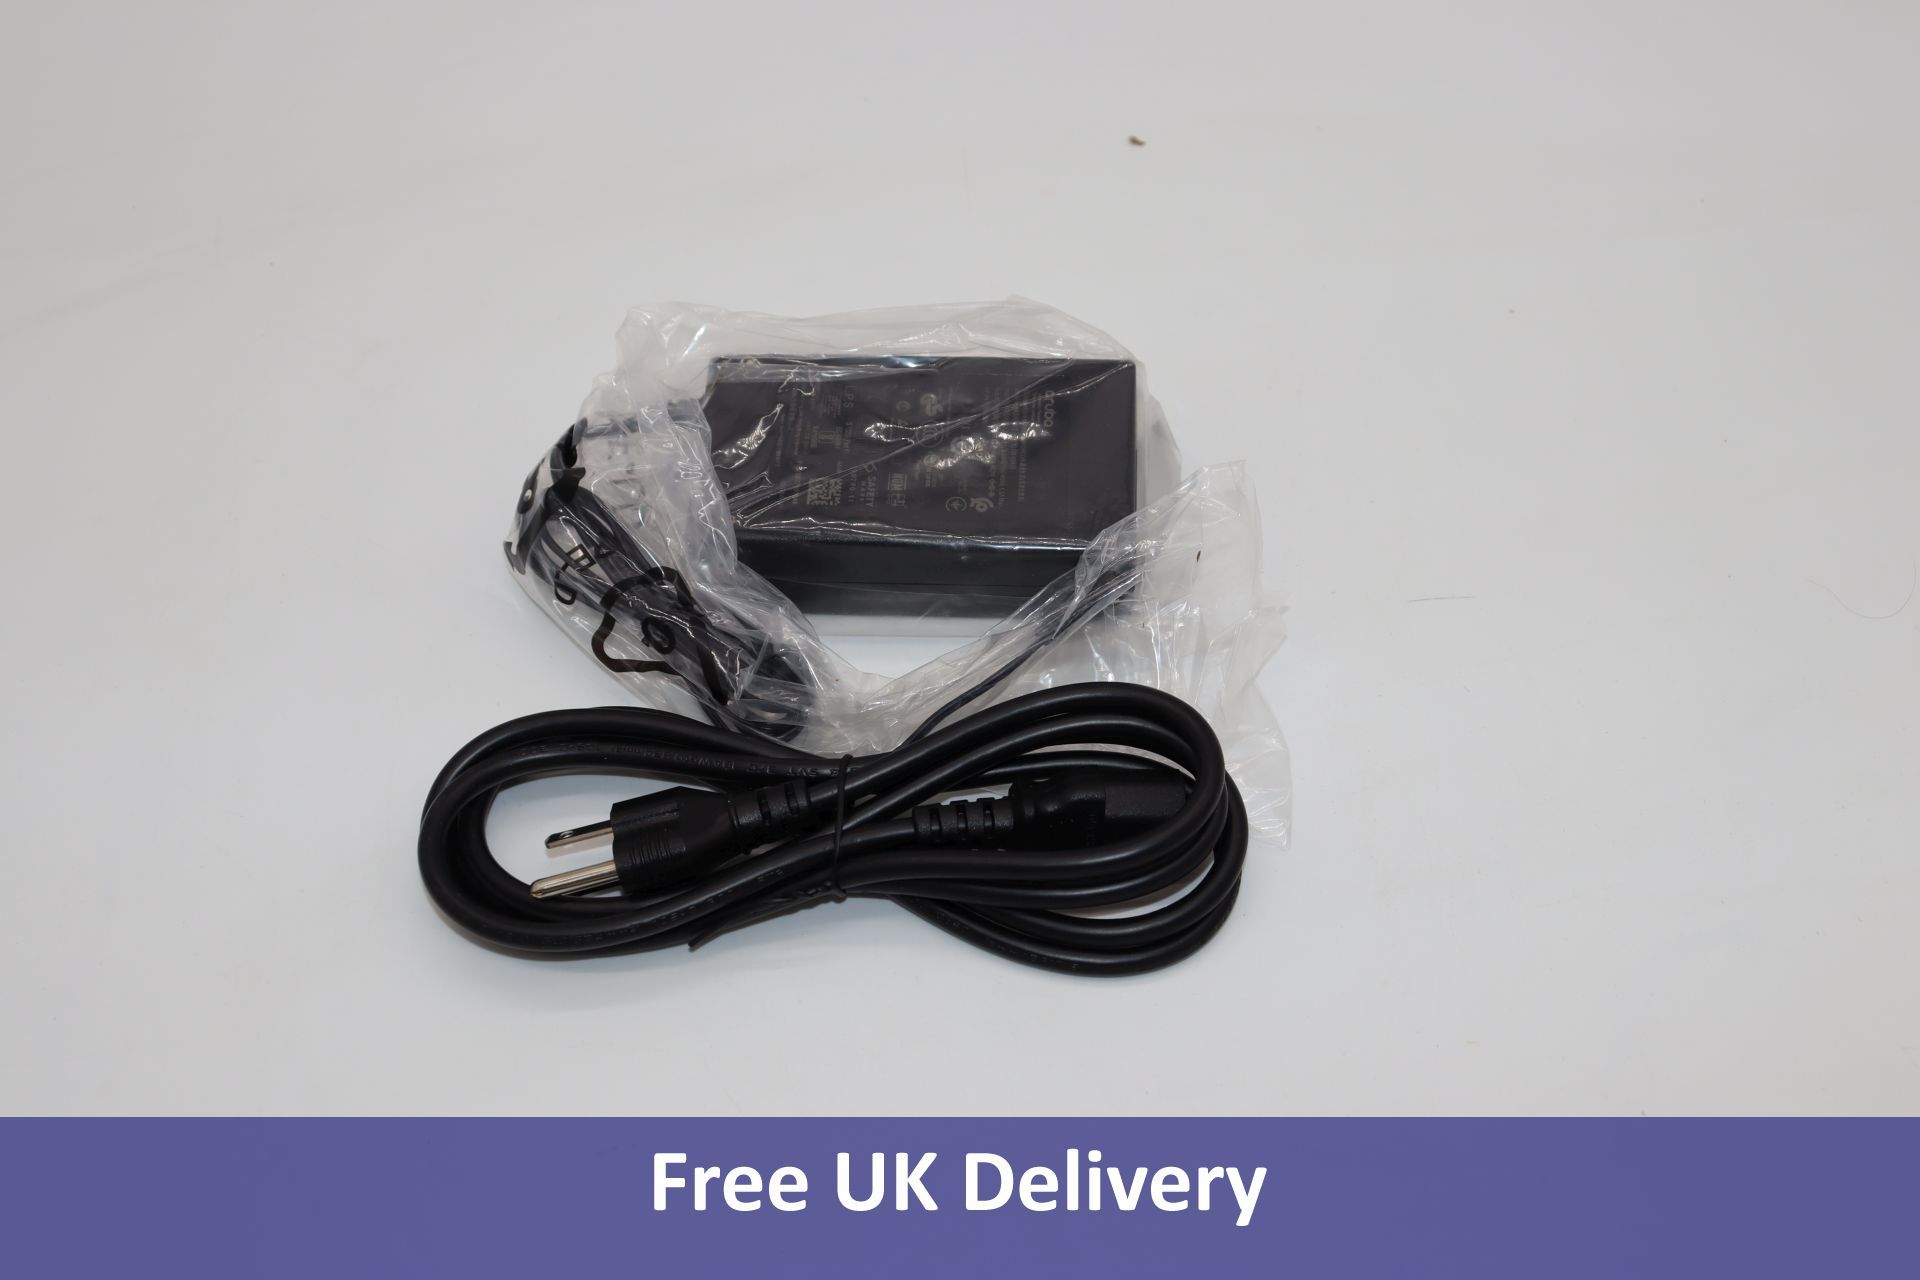 Two 12V/36W AC/DC Power Adapters R3J99A